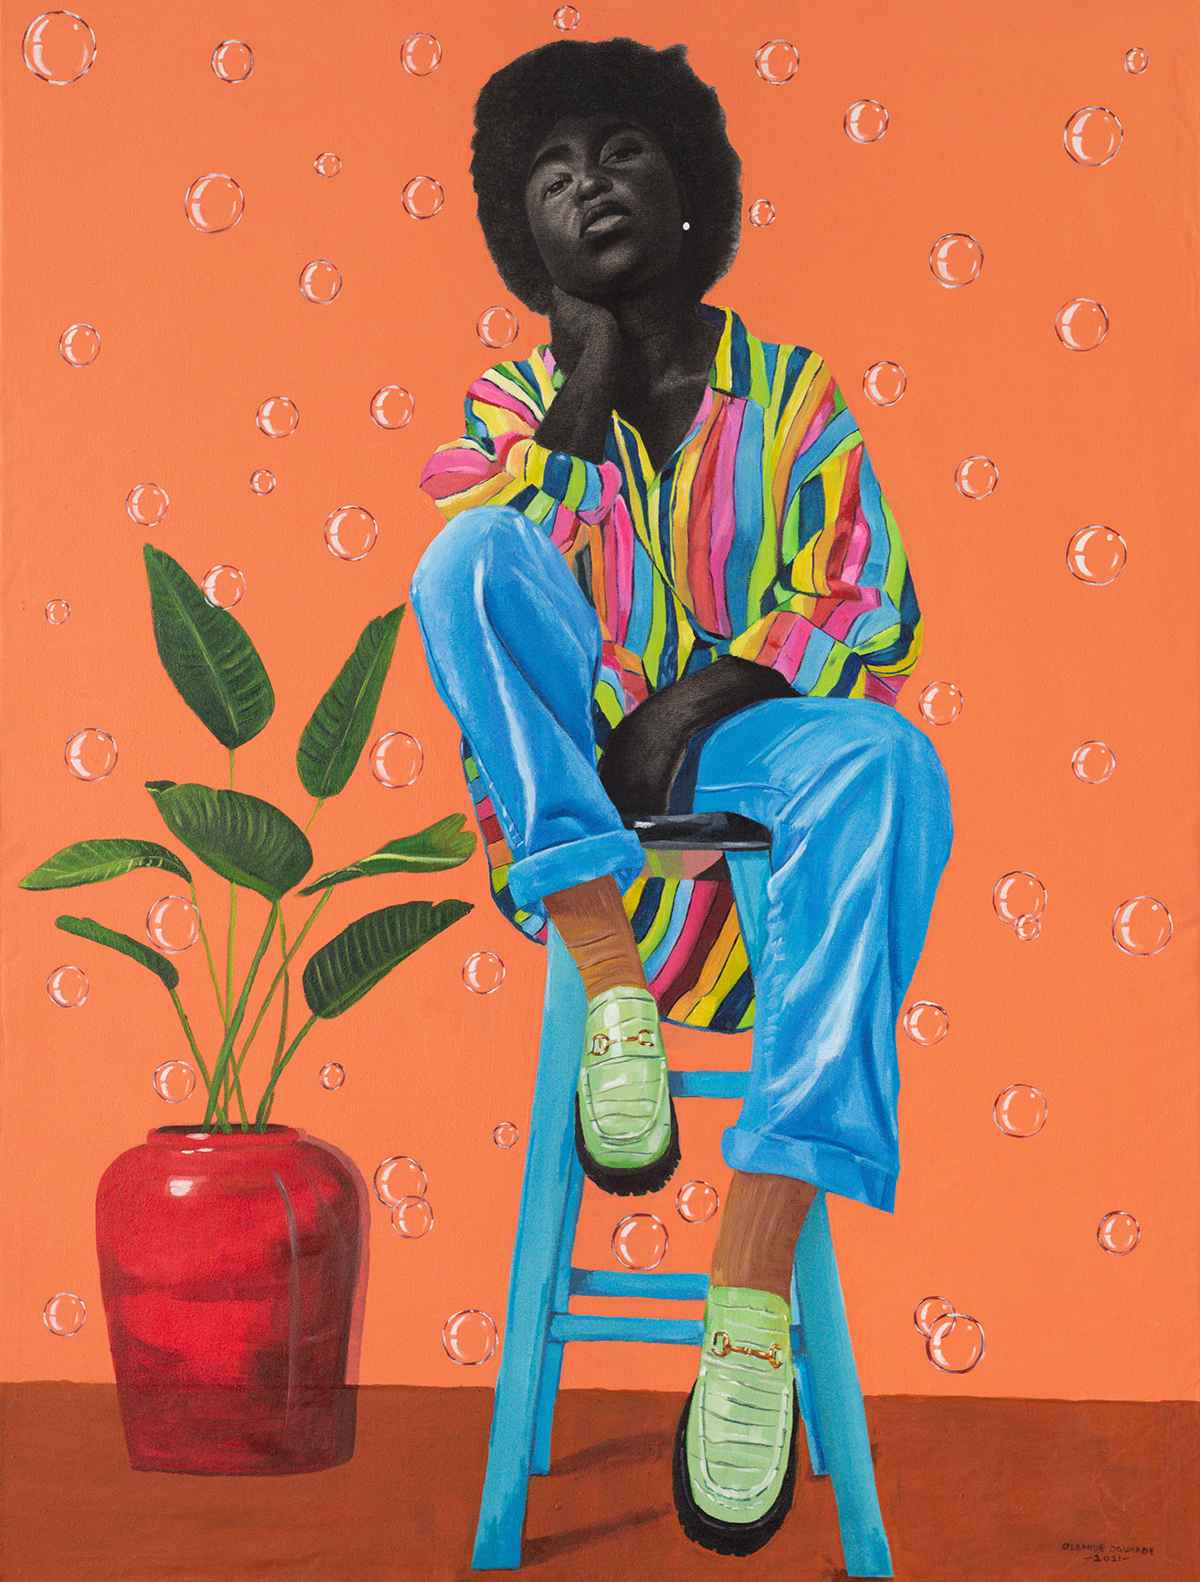 Painting of a woman on a blue stool in a bright, rainbox shirt, in front of a red wall with bubbles floating